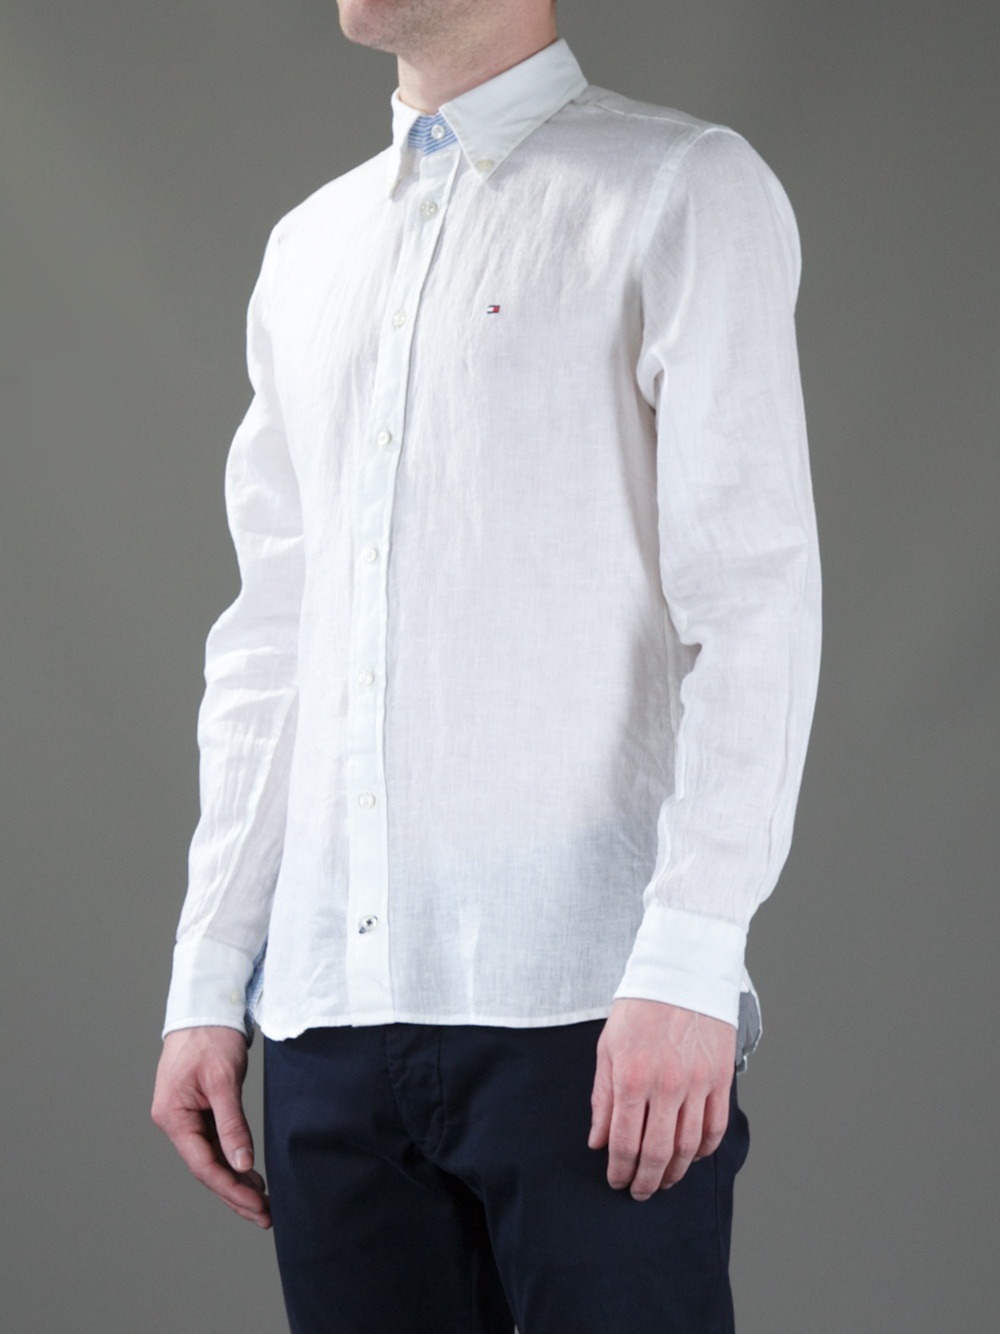 Tommy Hilfiger Classic Linen Shirt in White for Men - Lyst